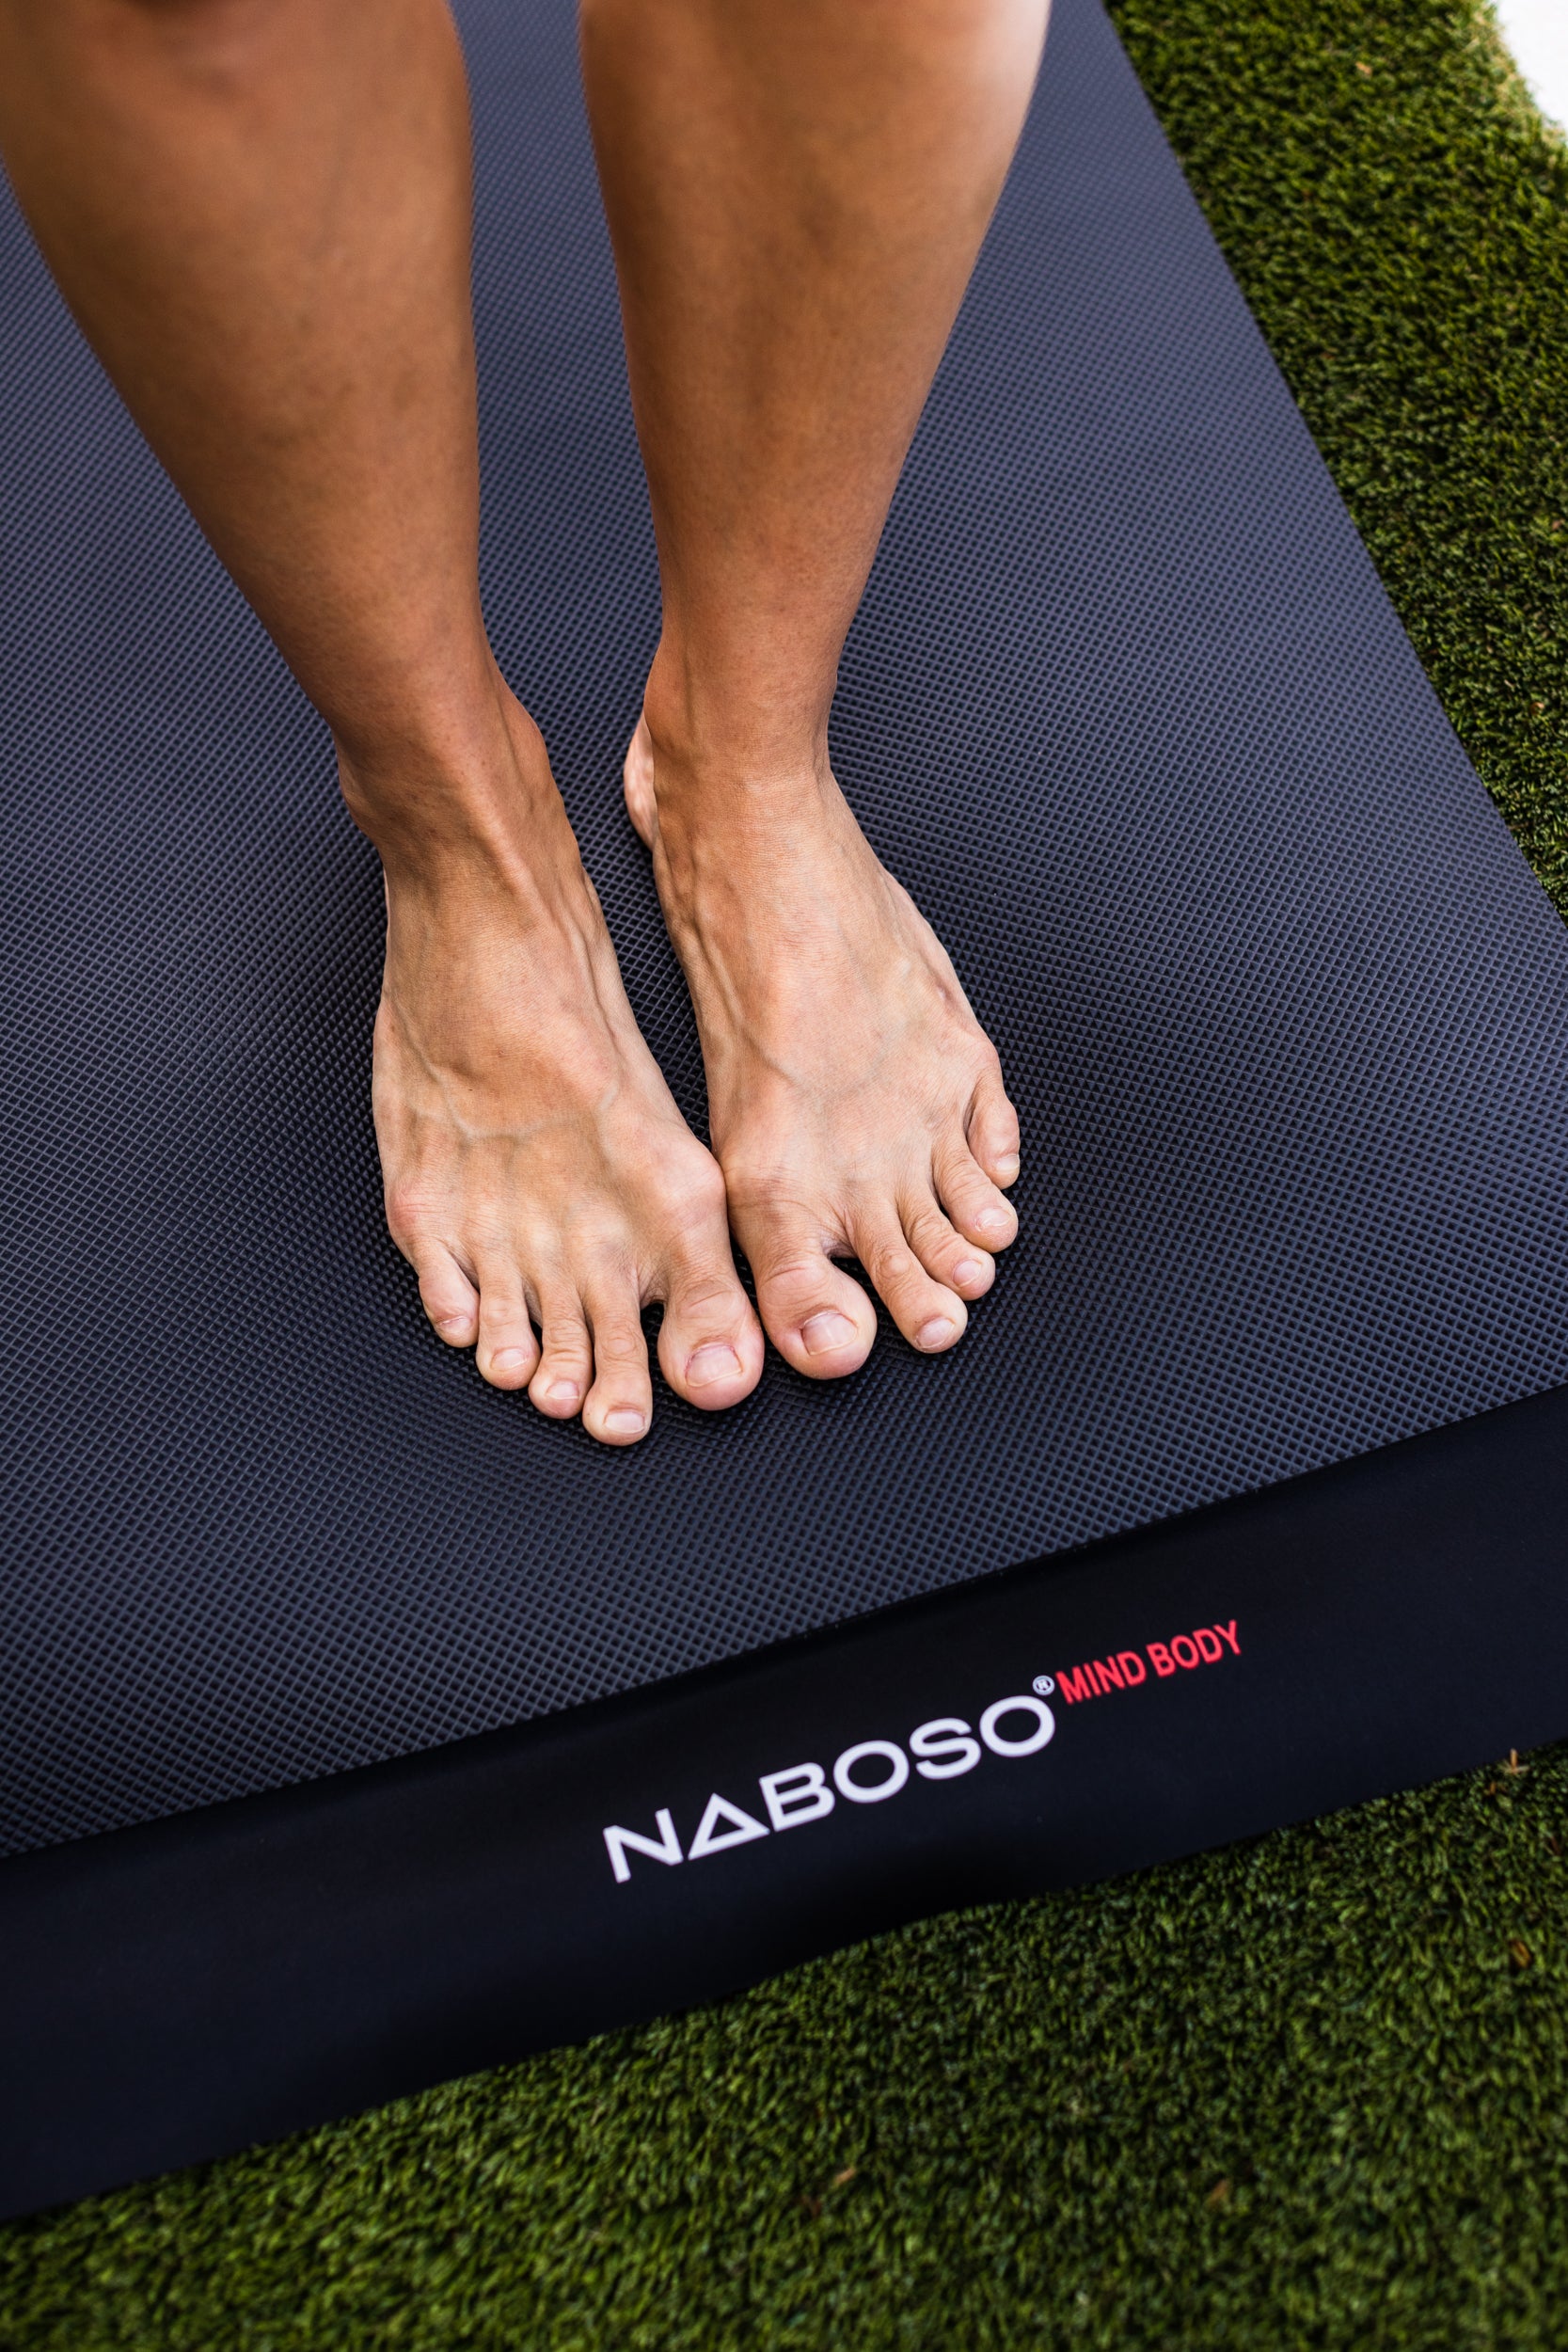 Naboso Mind Body Mat for barre, yoga and Pilates workouts – Naboso